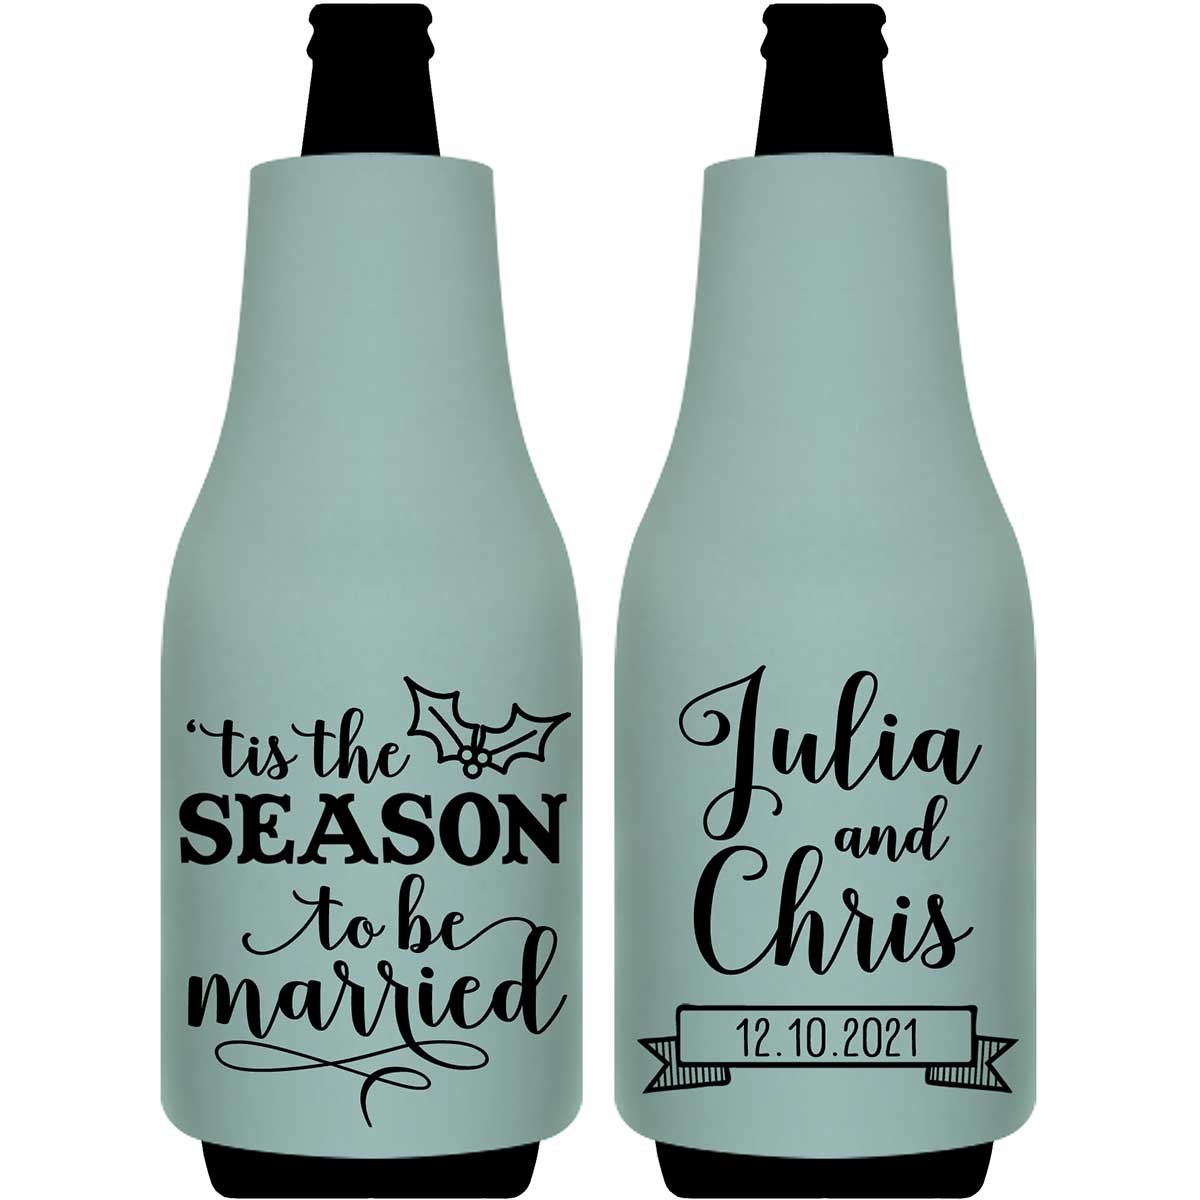 Tis The Season To Be Married 2A Foldable Bottle Sleeve Koozies Wedding Gifts for Guests